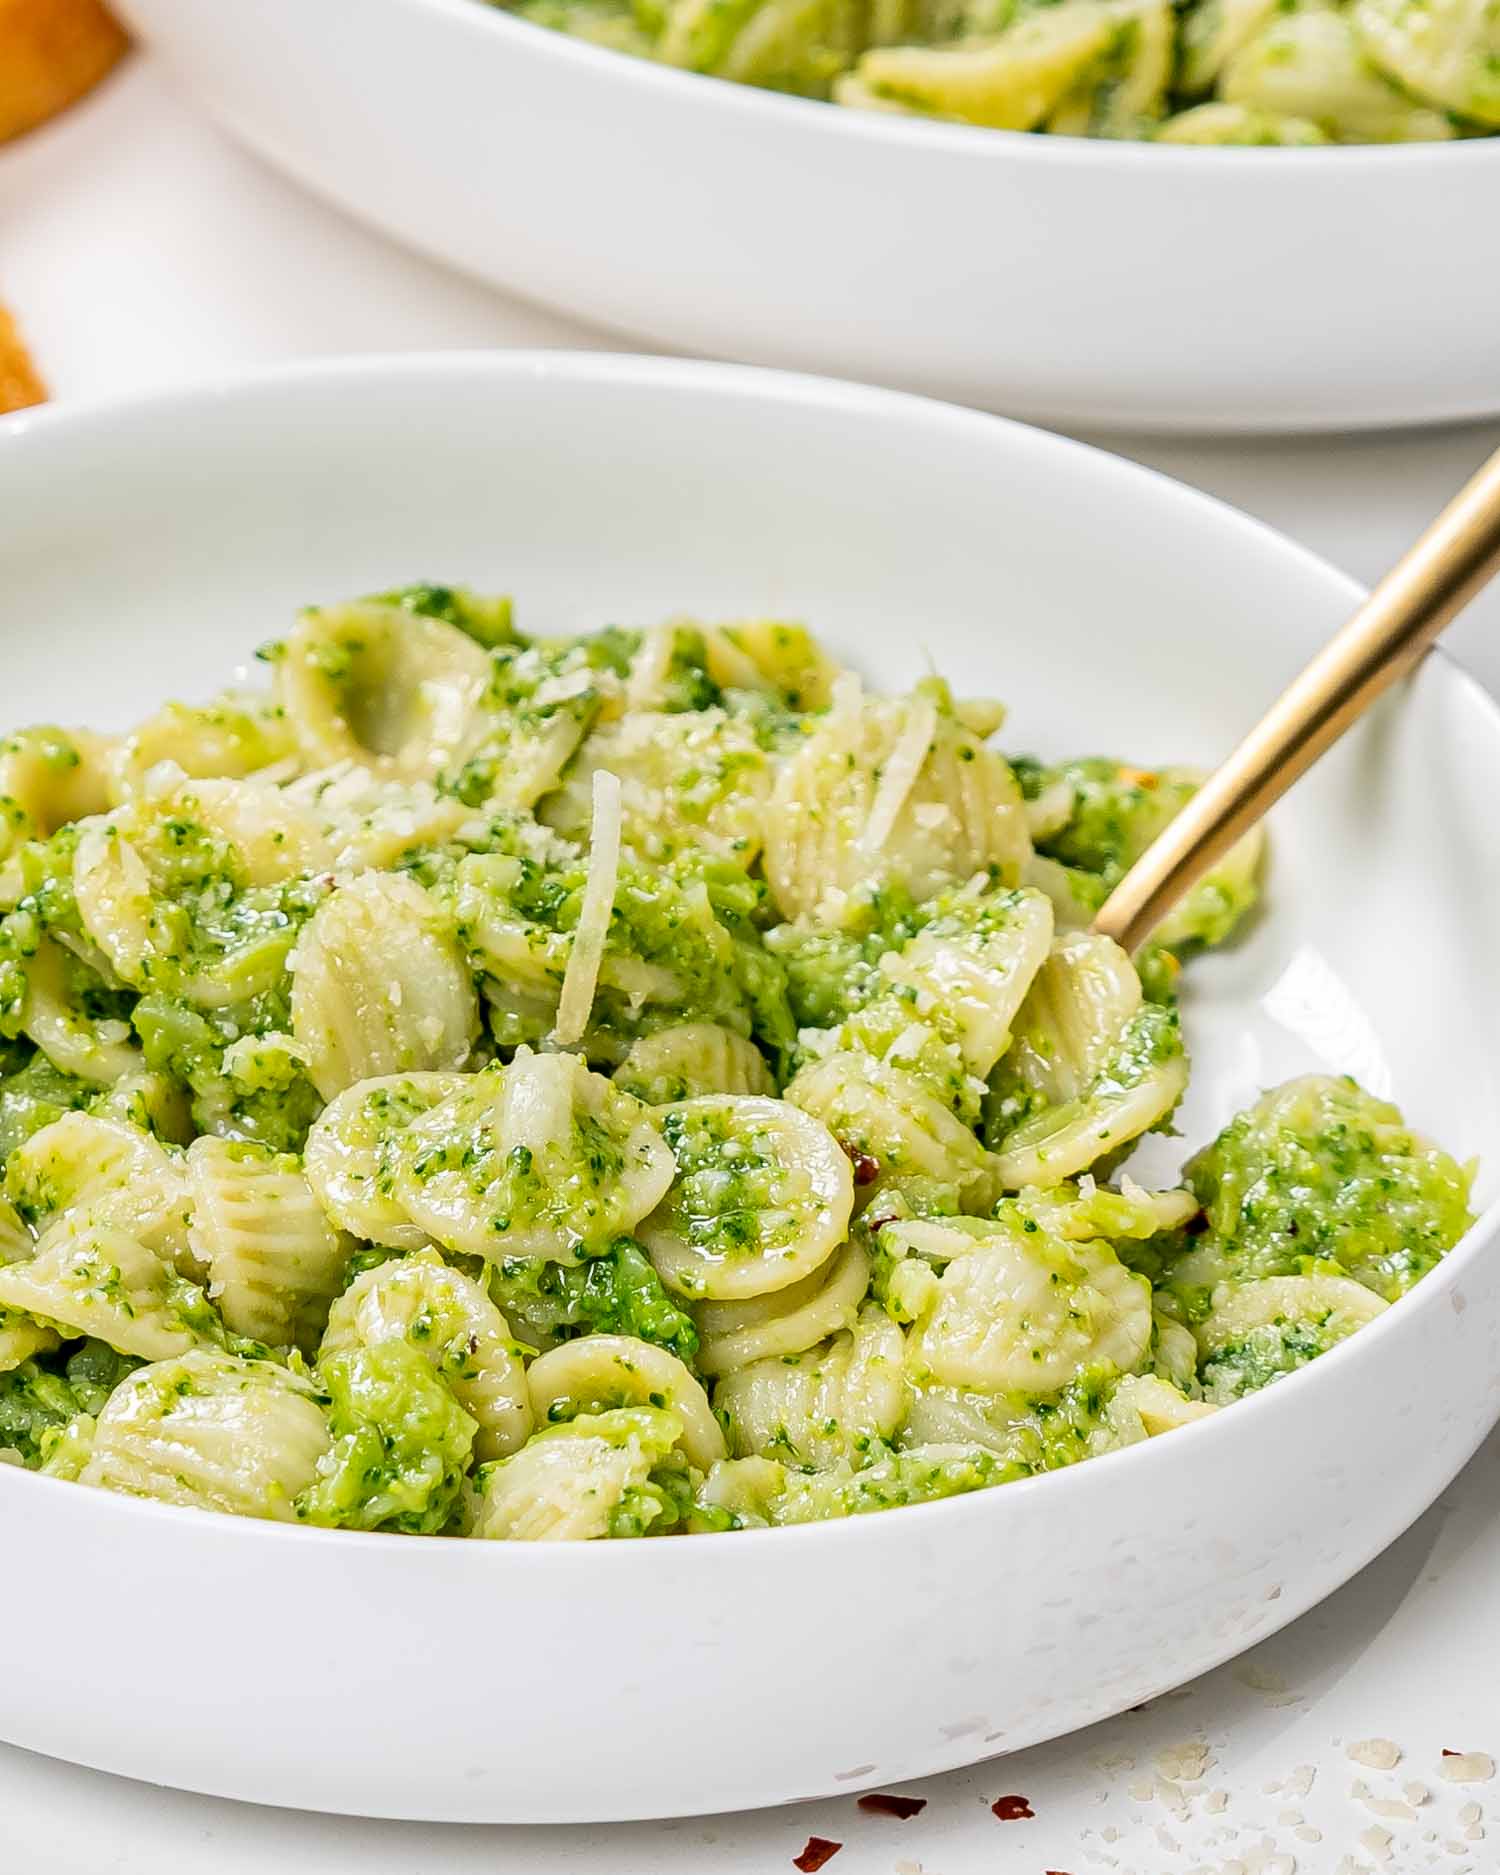 a serving of broccoli pasta in a white bowl.